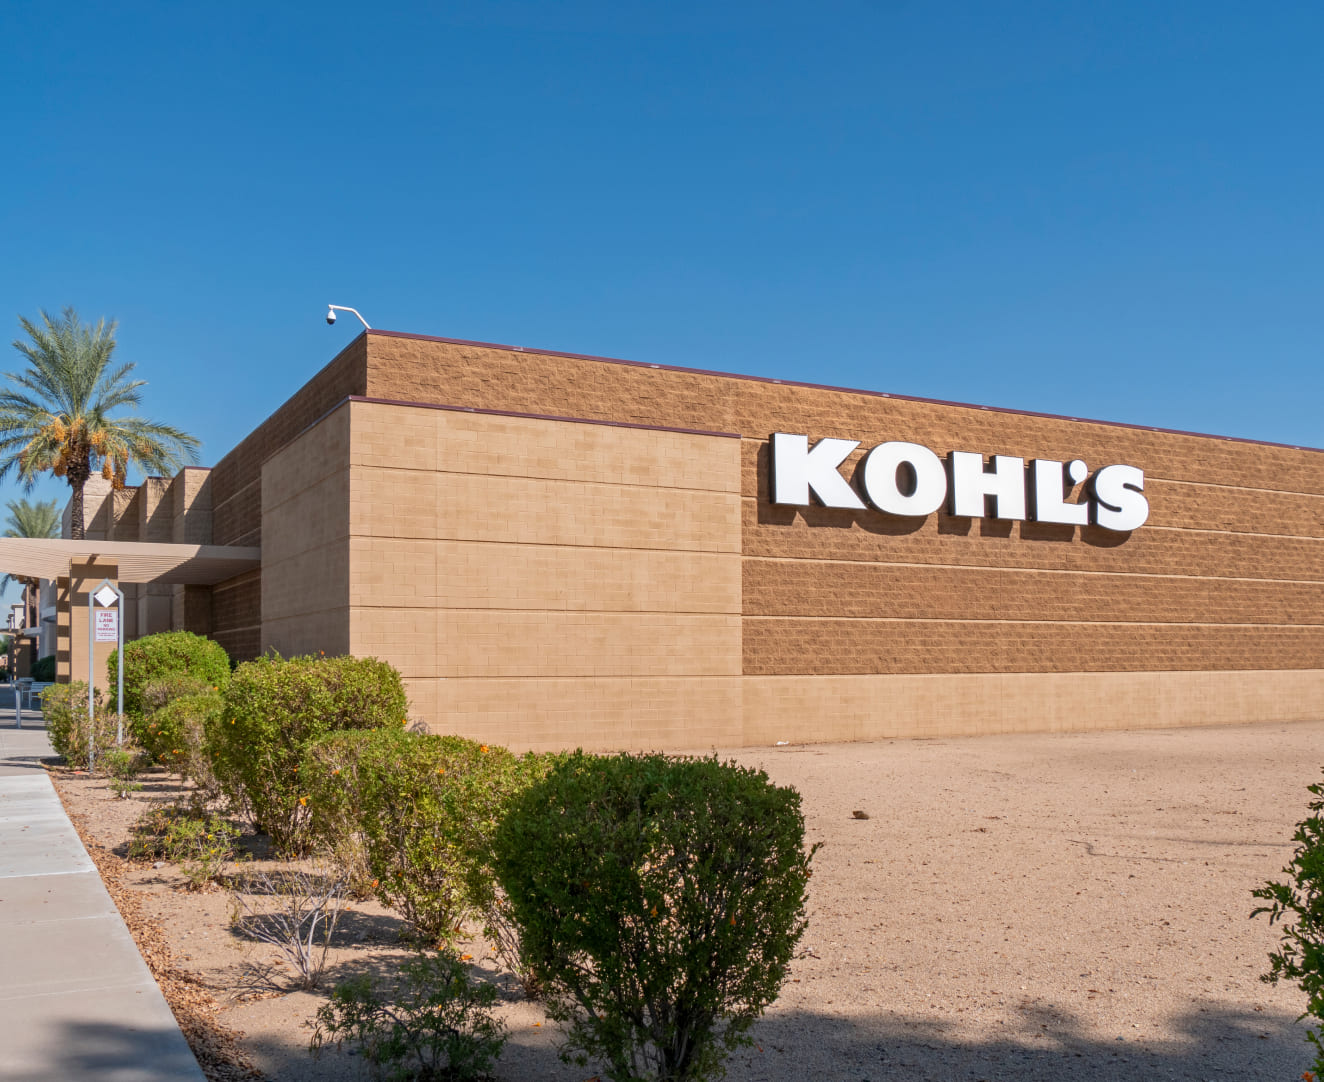 The side of the building that houses Kohl's at 1161 N. Dysart Road in Avondale, AZ.